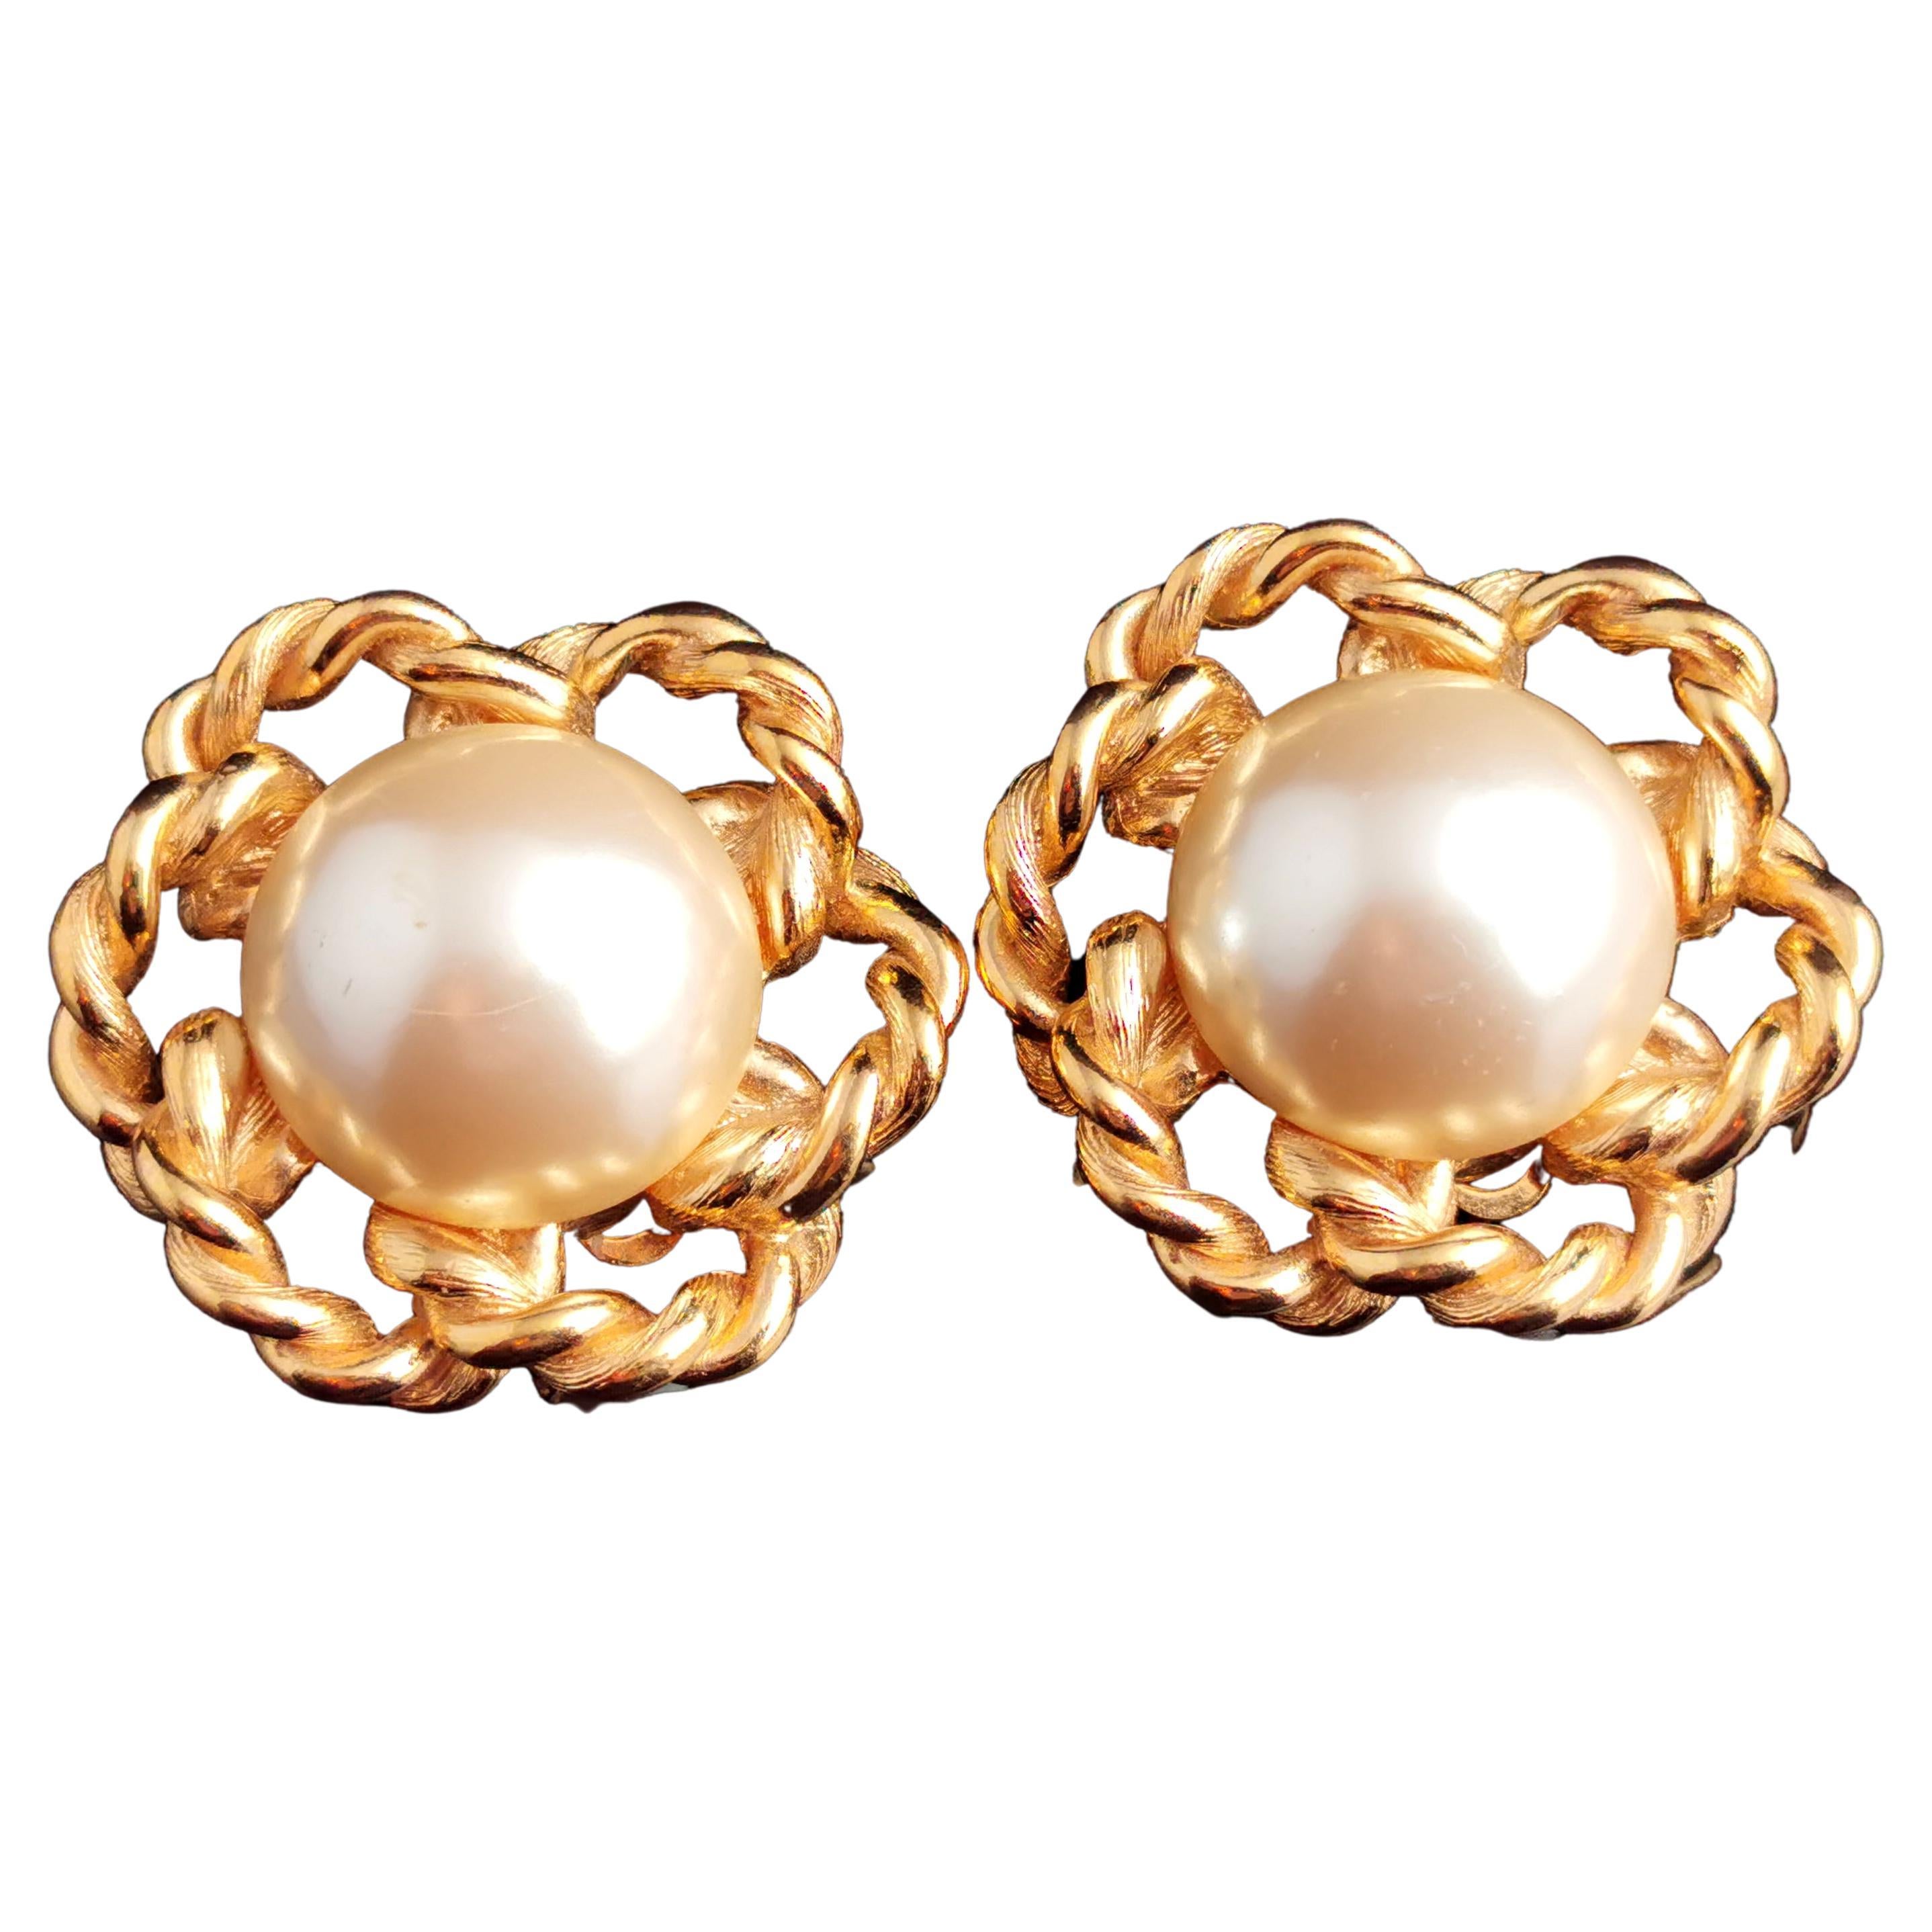 Vintage Givenchy faux pearl clip on earrings, Gold tone, c1980s 